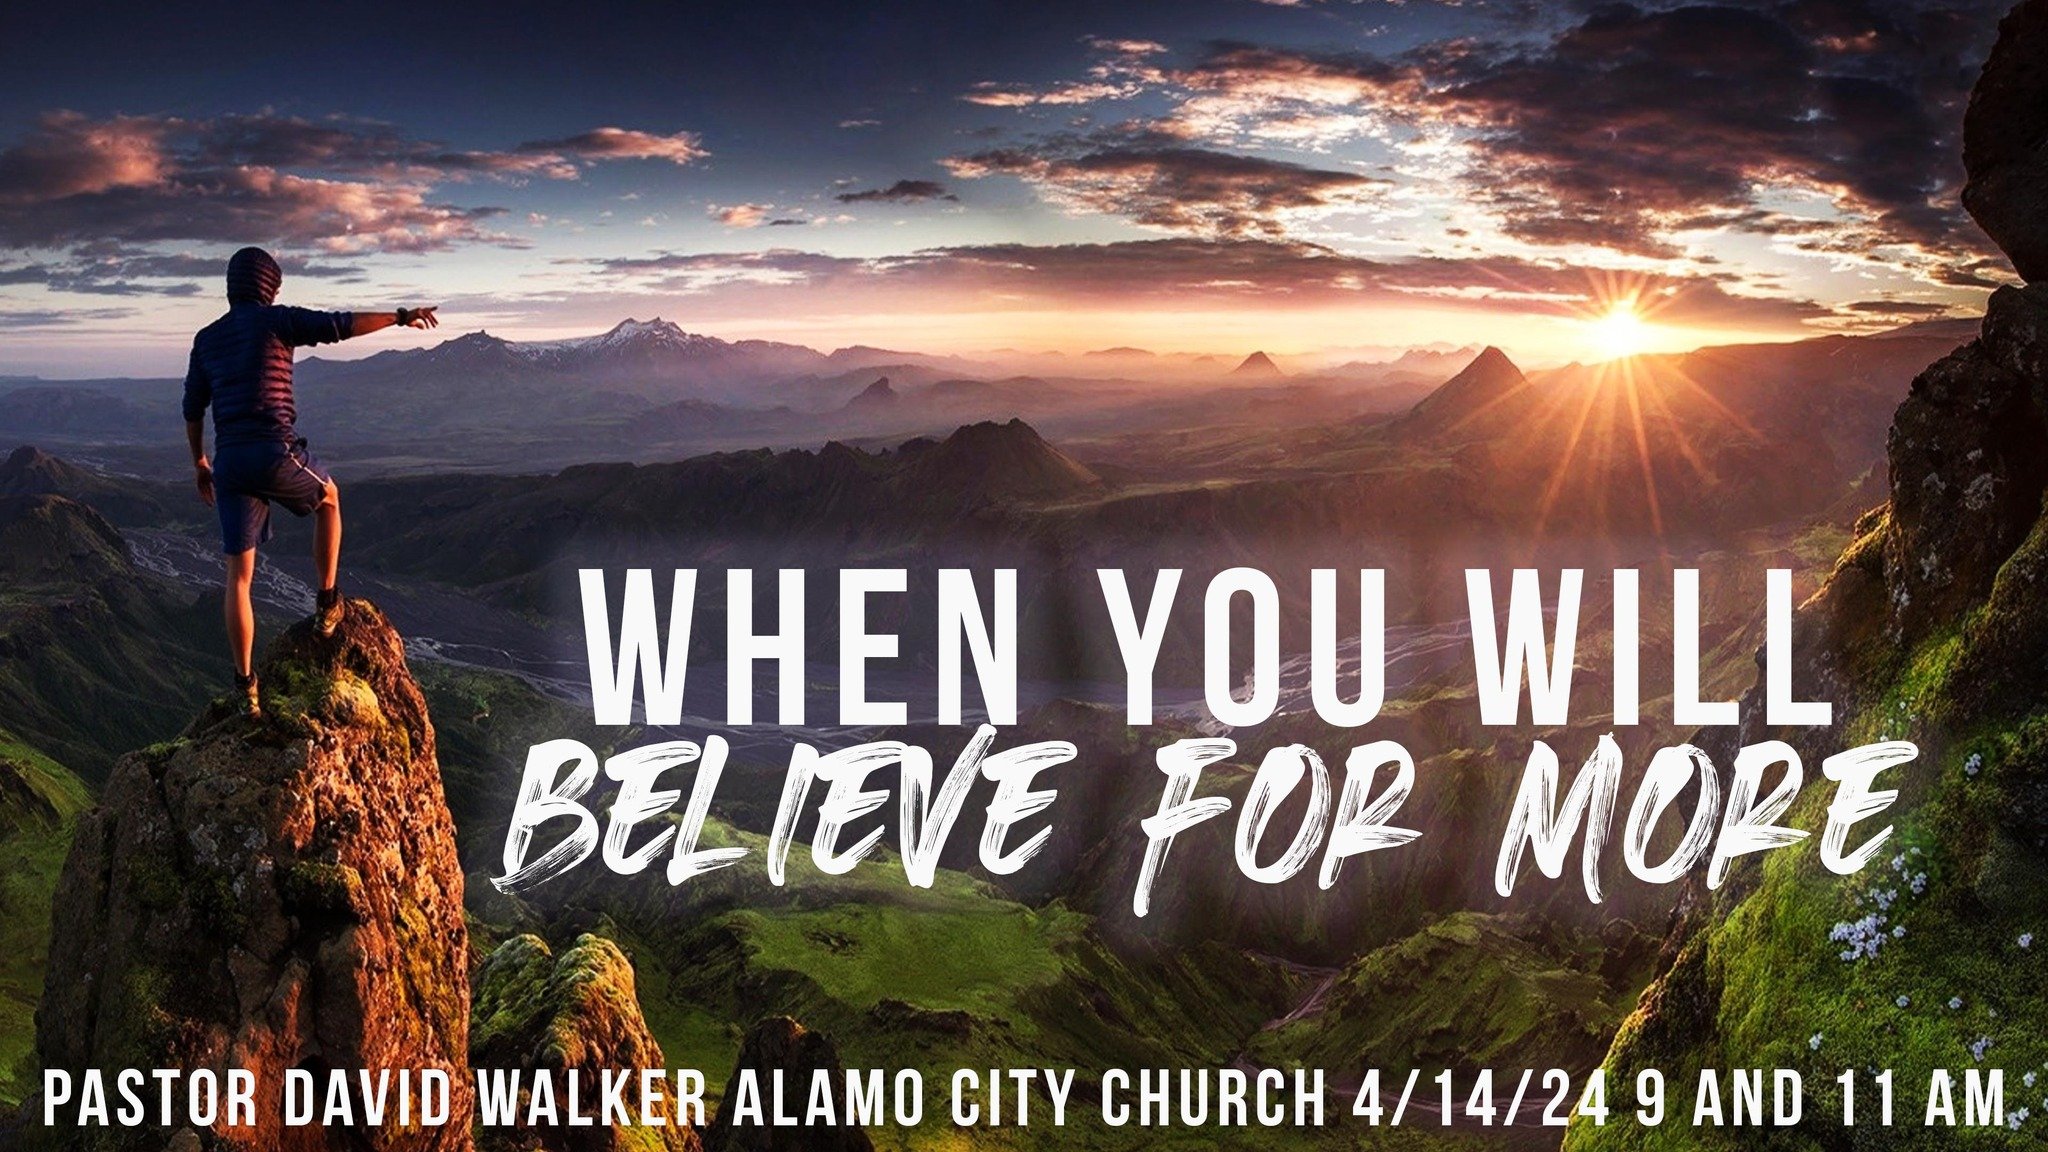 Join us TOMORROW at Alamo City!
We are thrilled to have Jillian Warman back with us to lead us into GOD'S presence tomorrow with our worship team.
Pastor Walker will share a powerful message-&quot;When You Will Believe For More&quot;
We have been pra